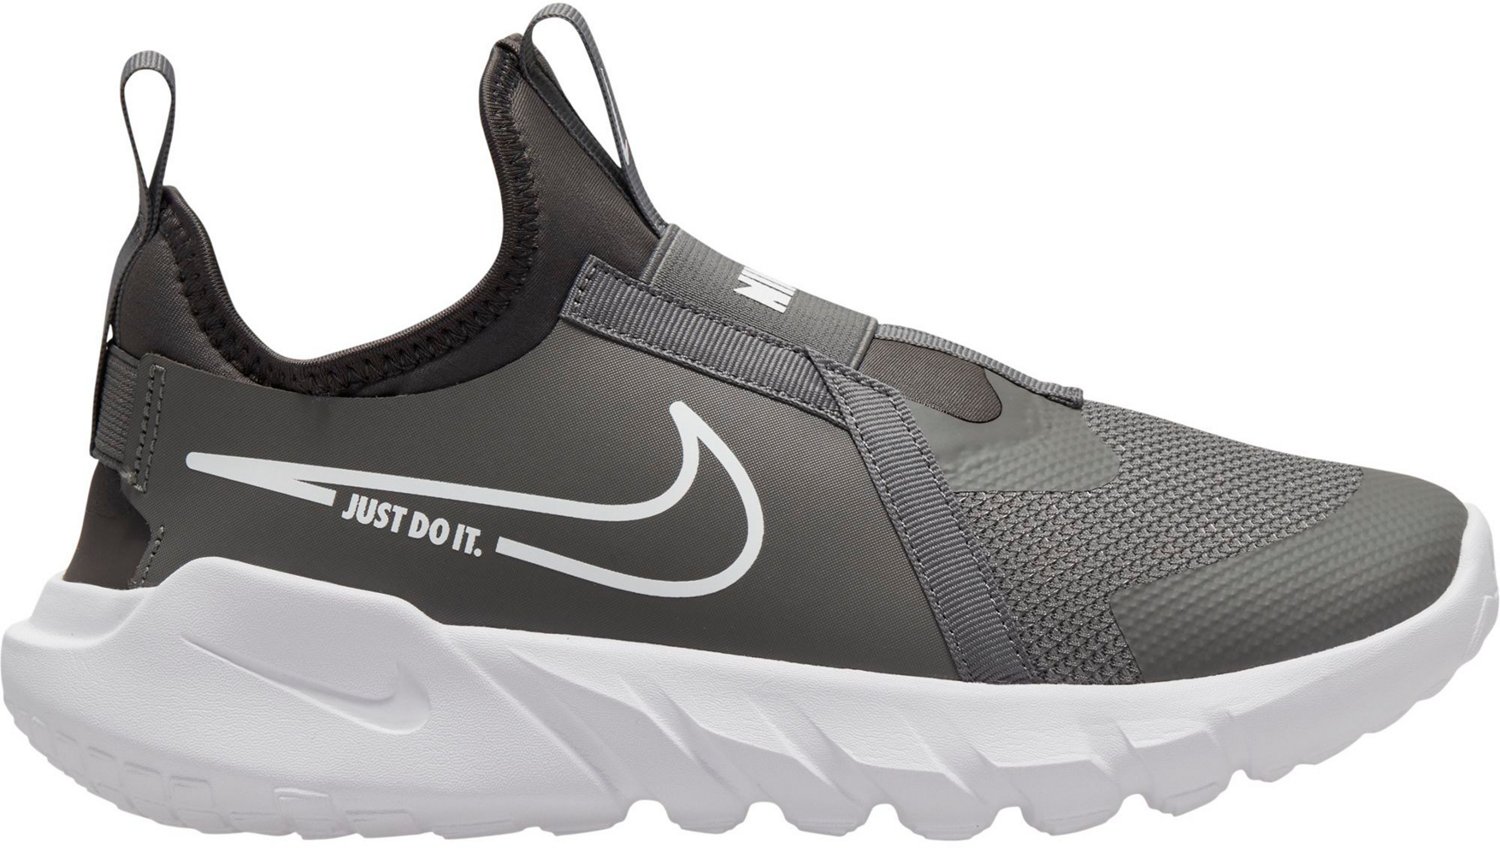 Nike Kids' Flex Runner 2 GS Shoes | Free Shipping at Academy